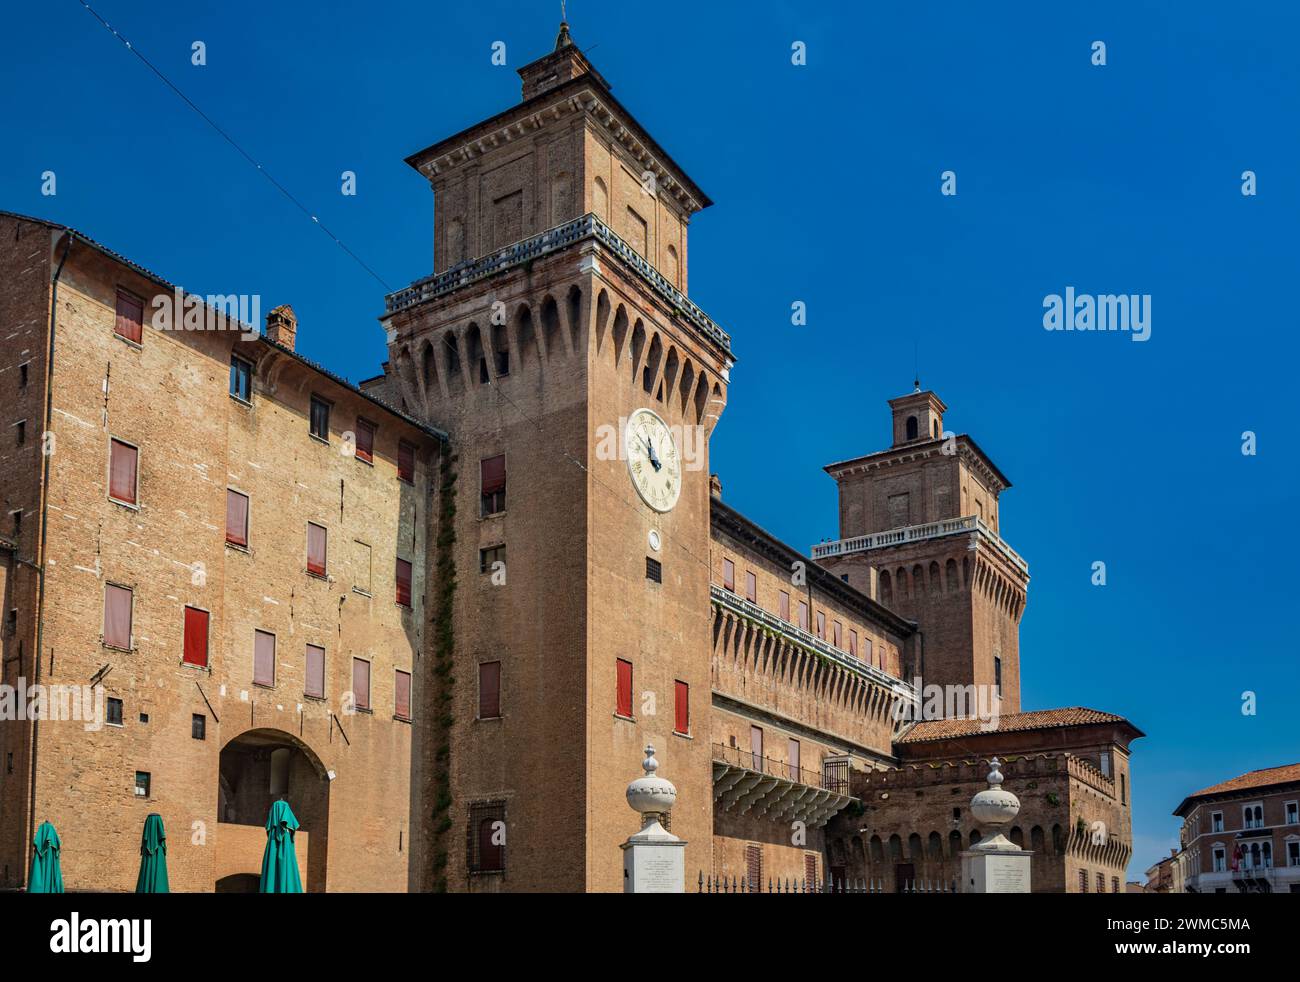 Ferrara, Emilia Romagna, Italy. The imposing Estense castle, built by the noble Este family, with its towers and moat full of water. UNESCO World Heri Stock Photo